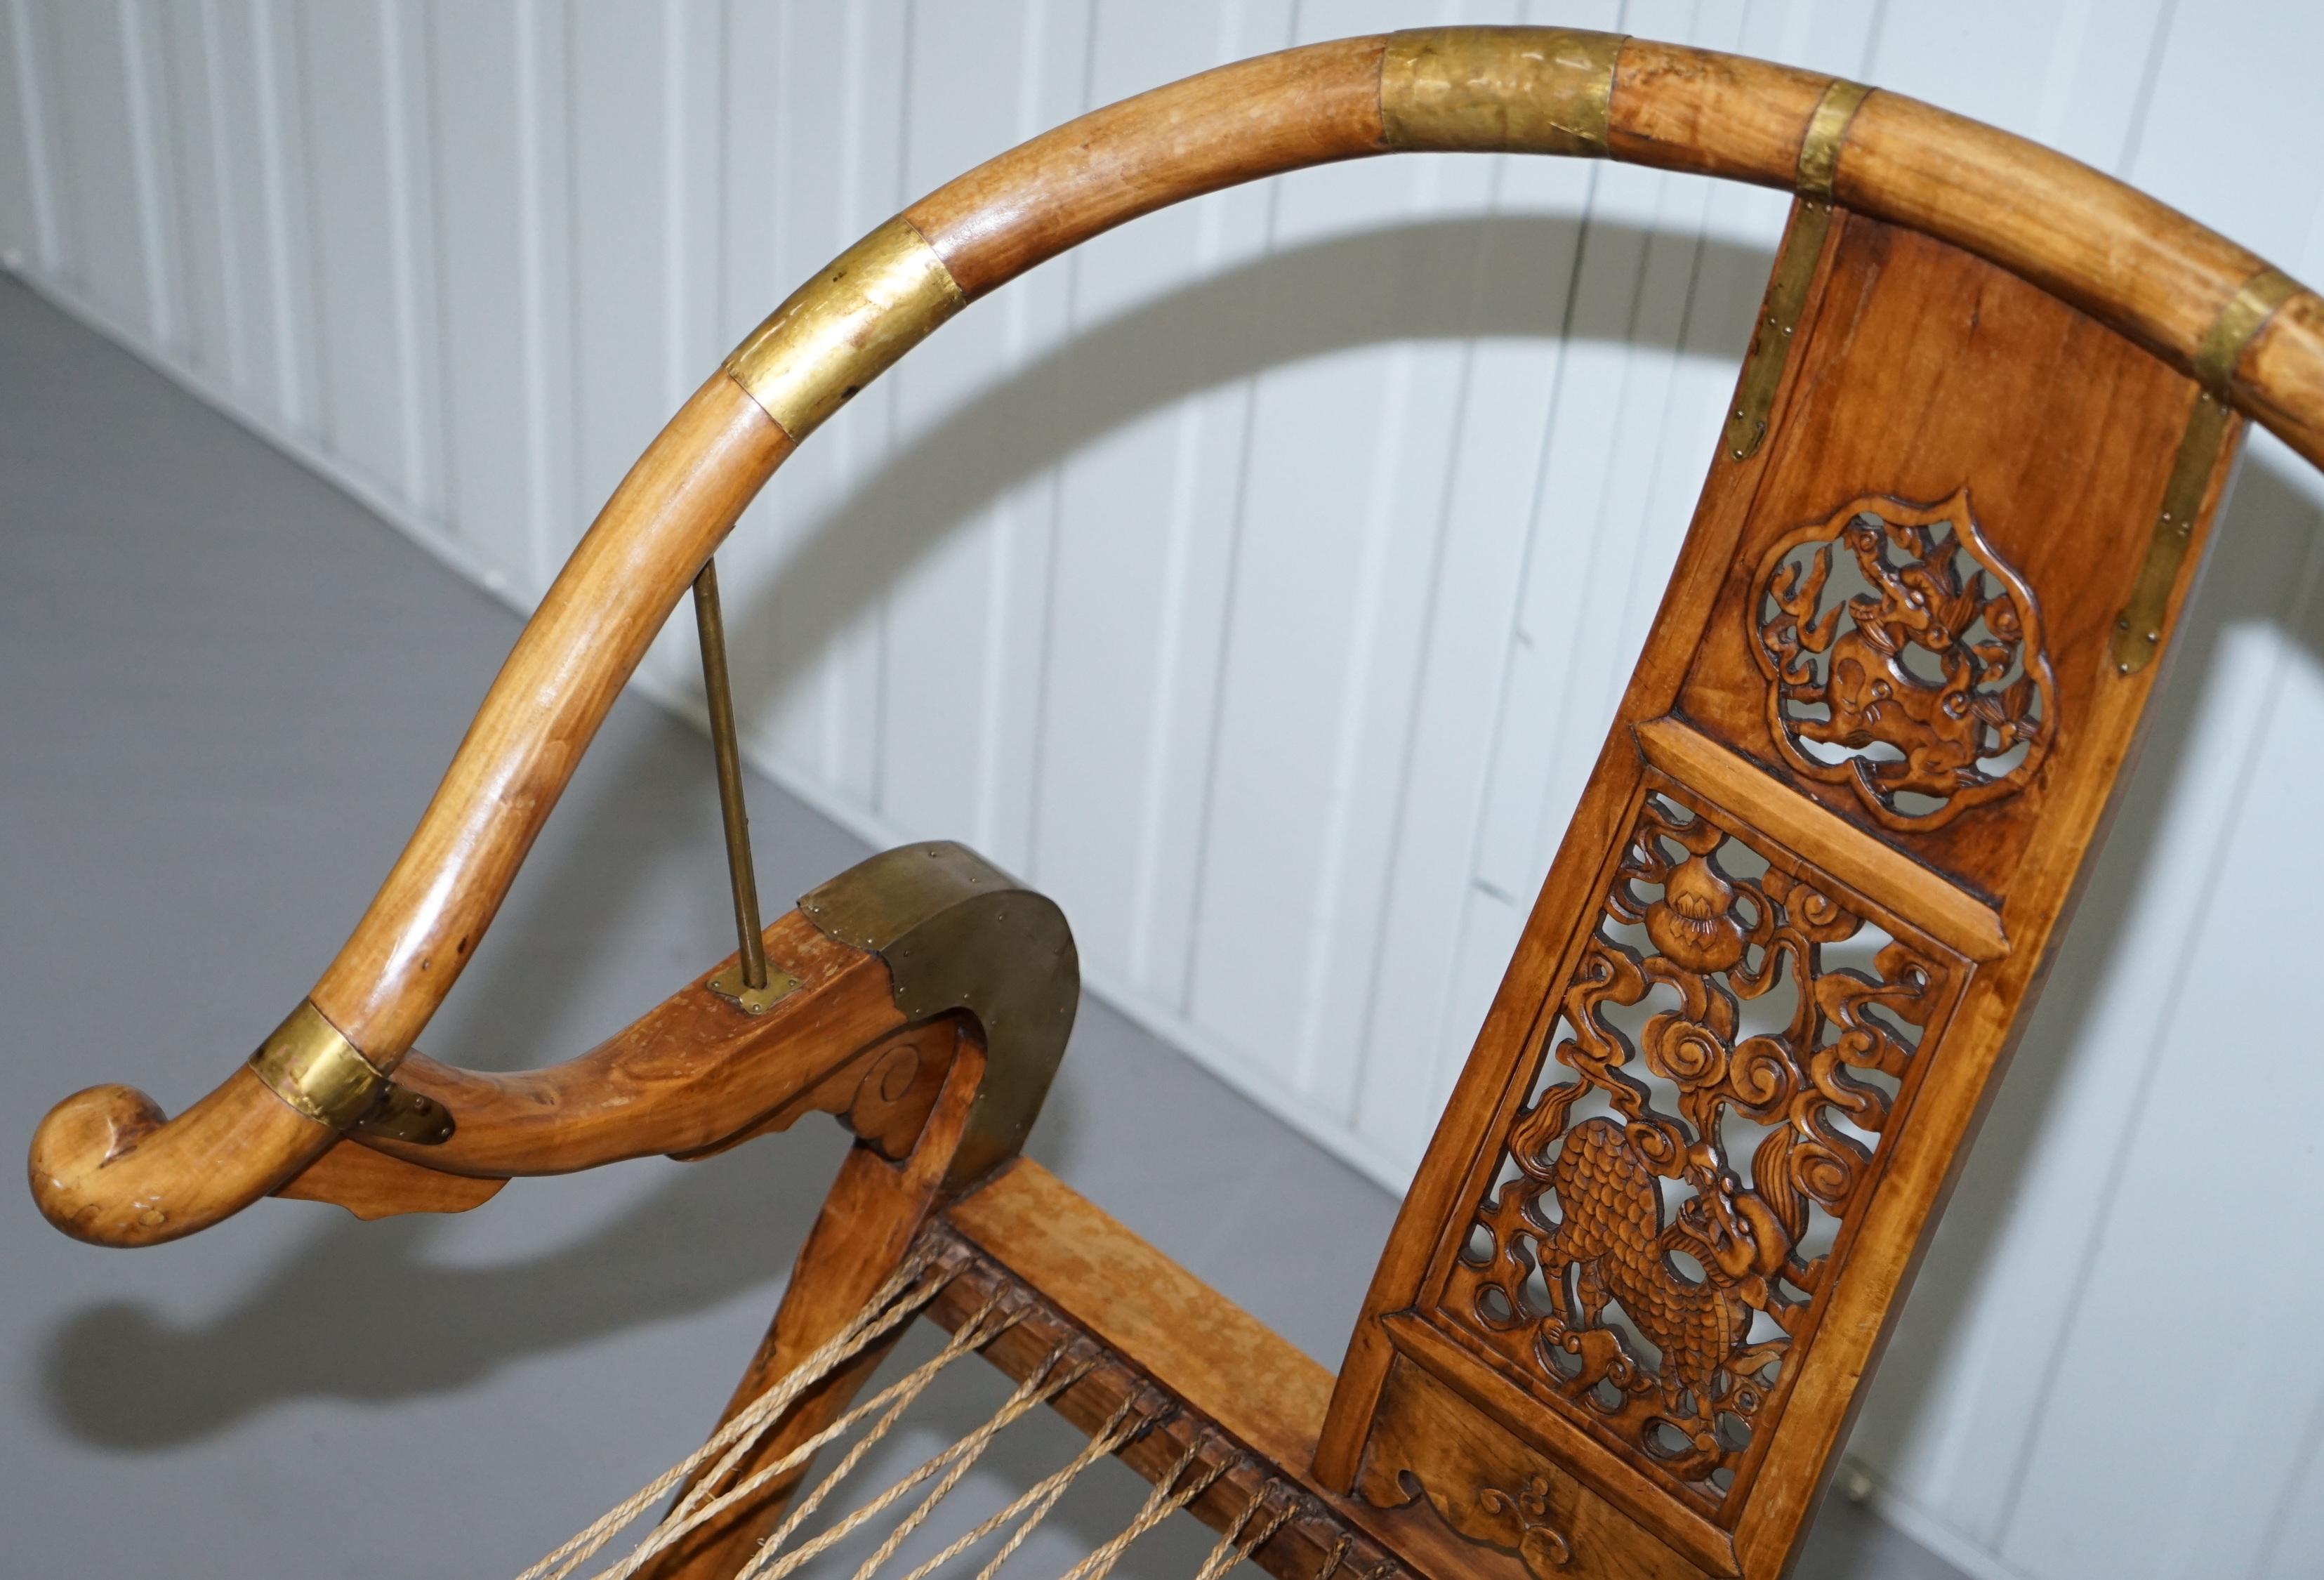 Chinese Export Pair of Vintage Chinese Solid Hardwood Horseshoe Folding Chairs Brass Fittings